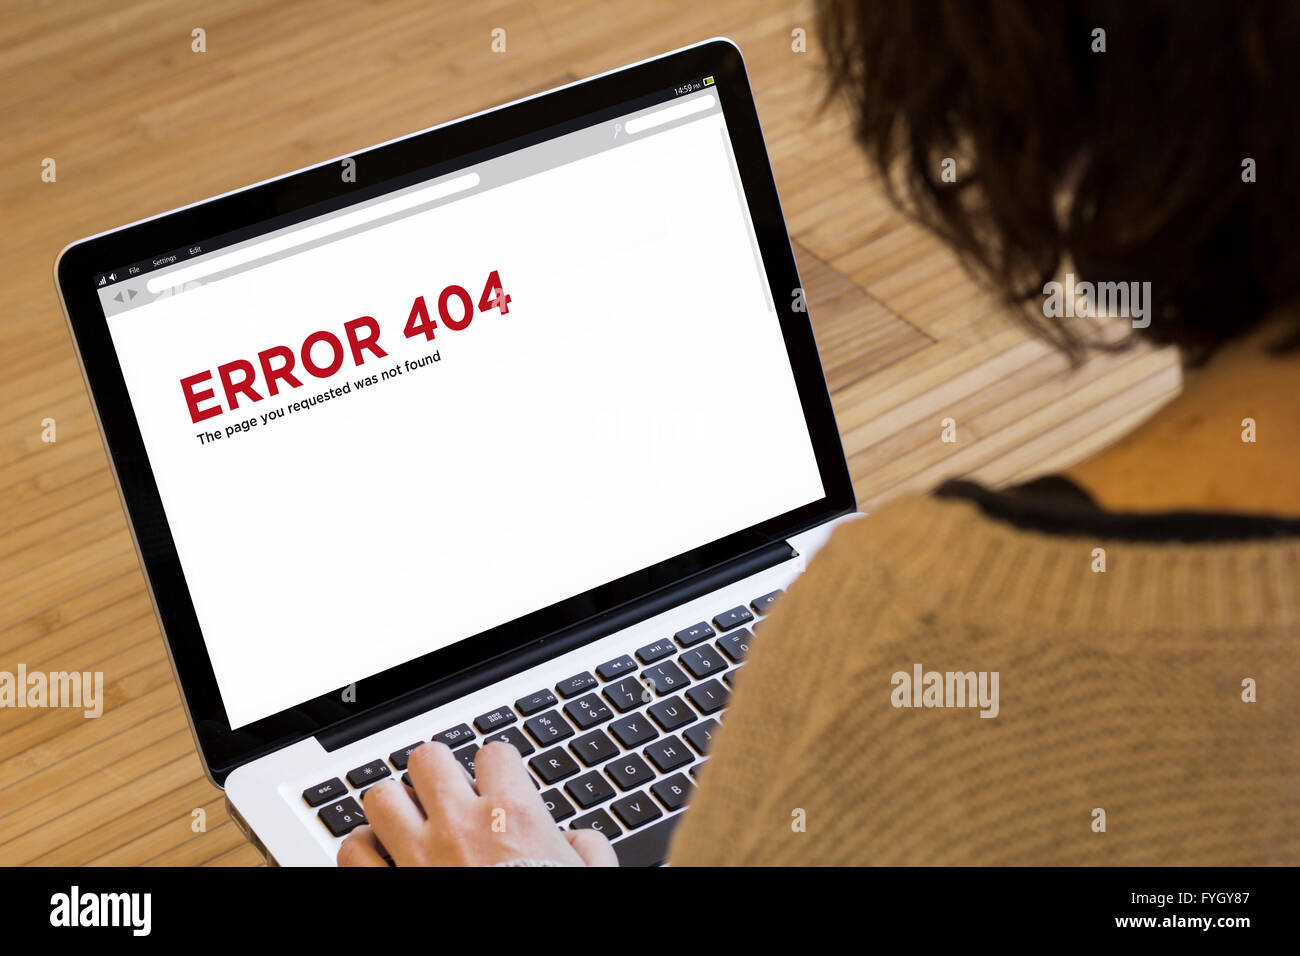 internet concept: error 404 on a laptop screen. Screen graphics are made up. Stock Photo